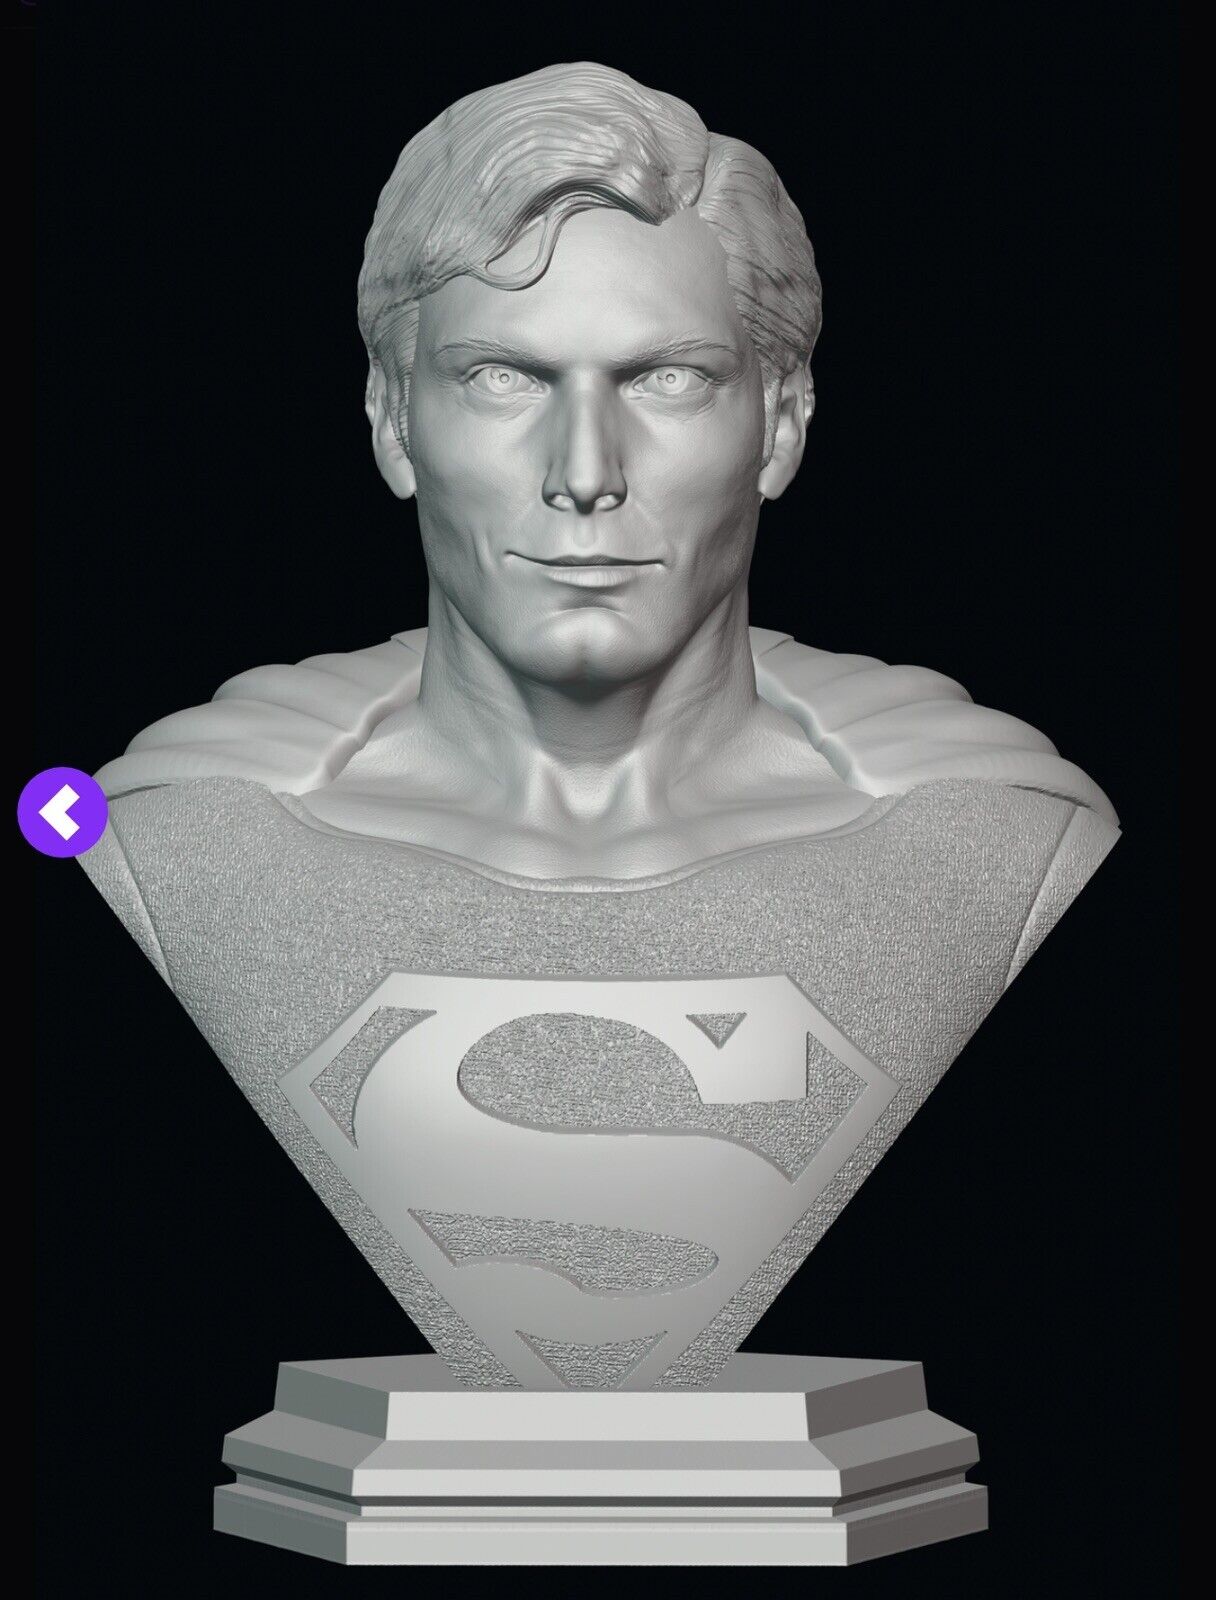 Christopher Reeves Superman Bust Skin Color 3D Print 241mm Tall 